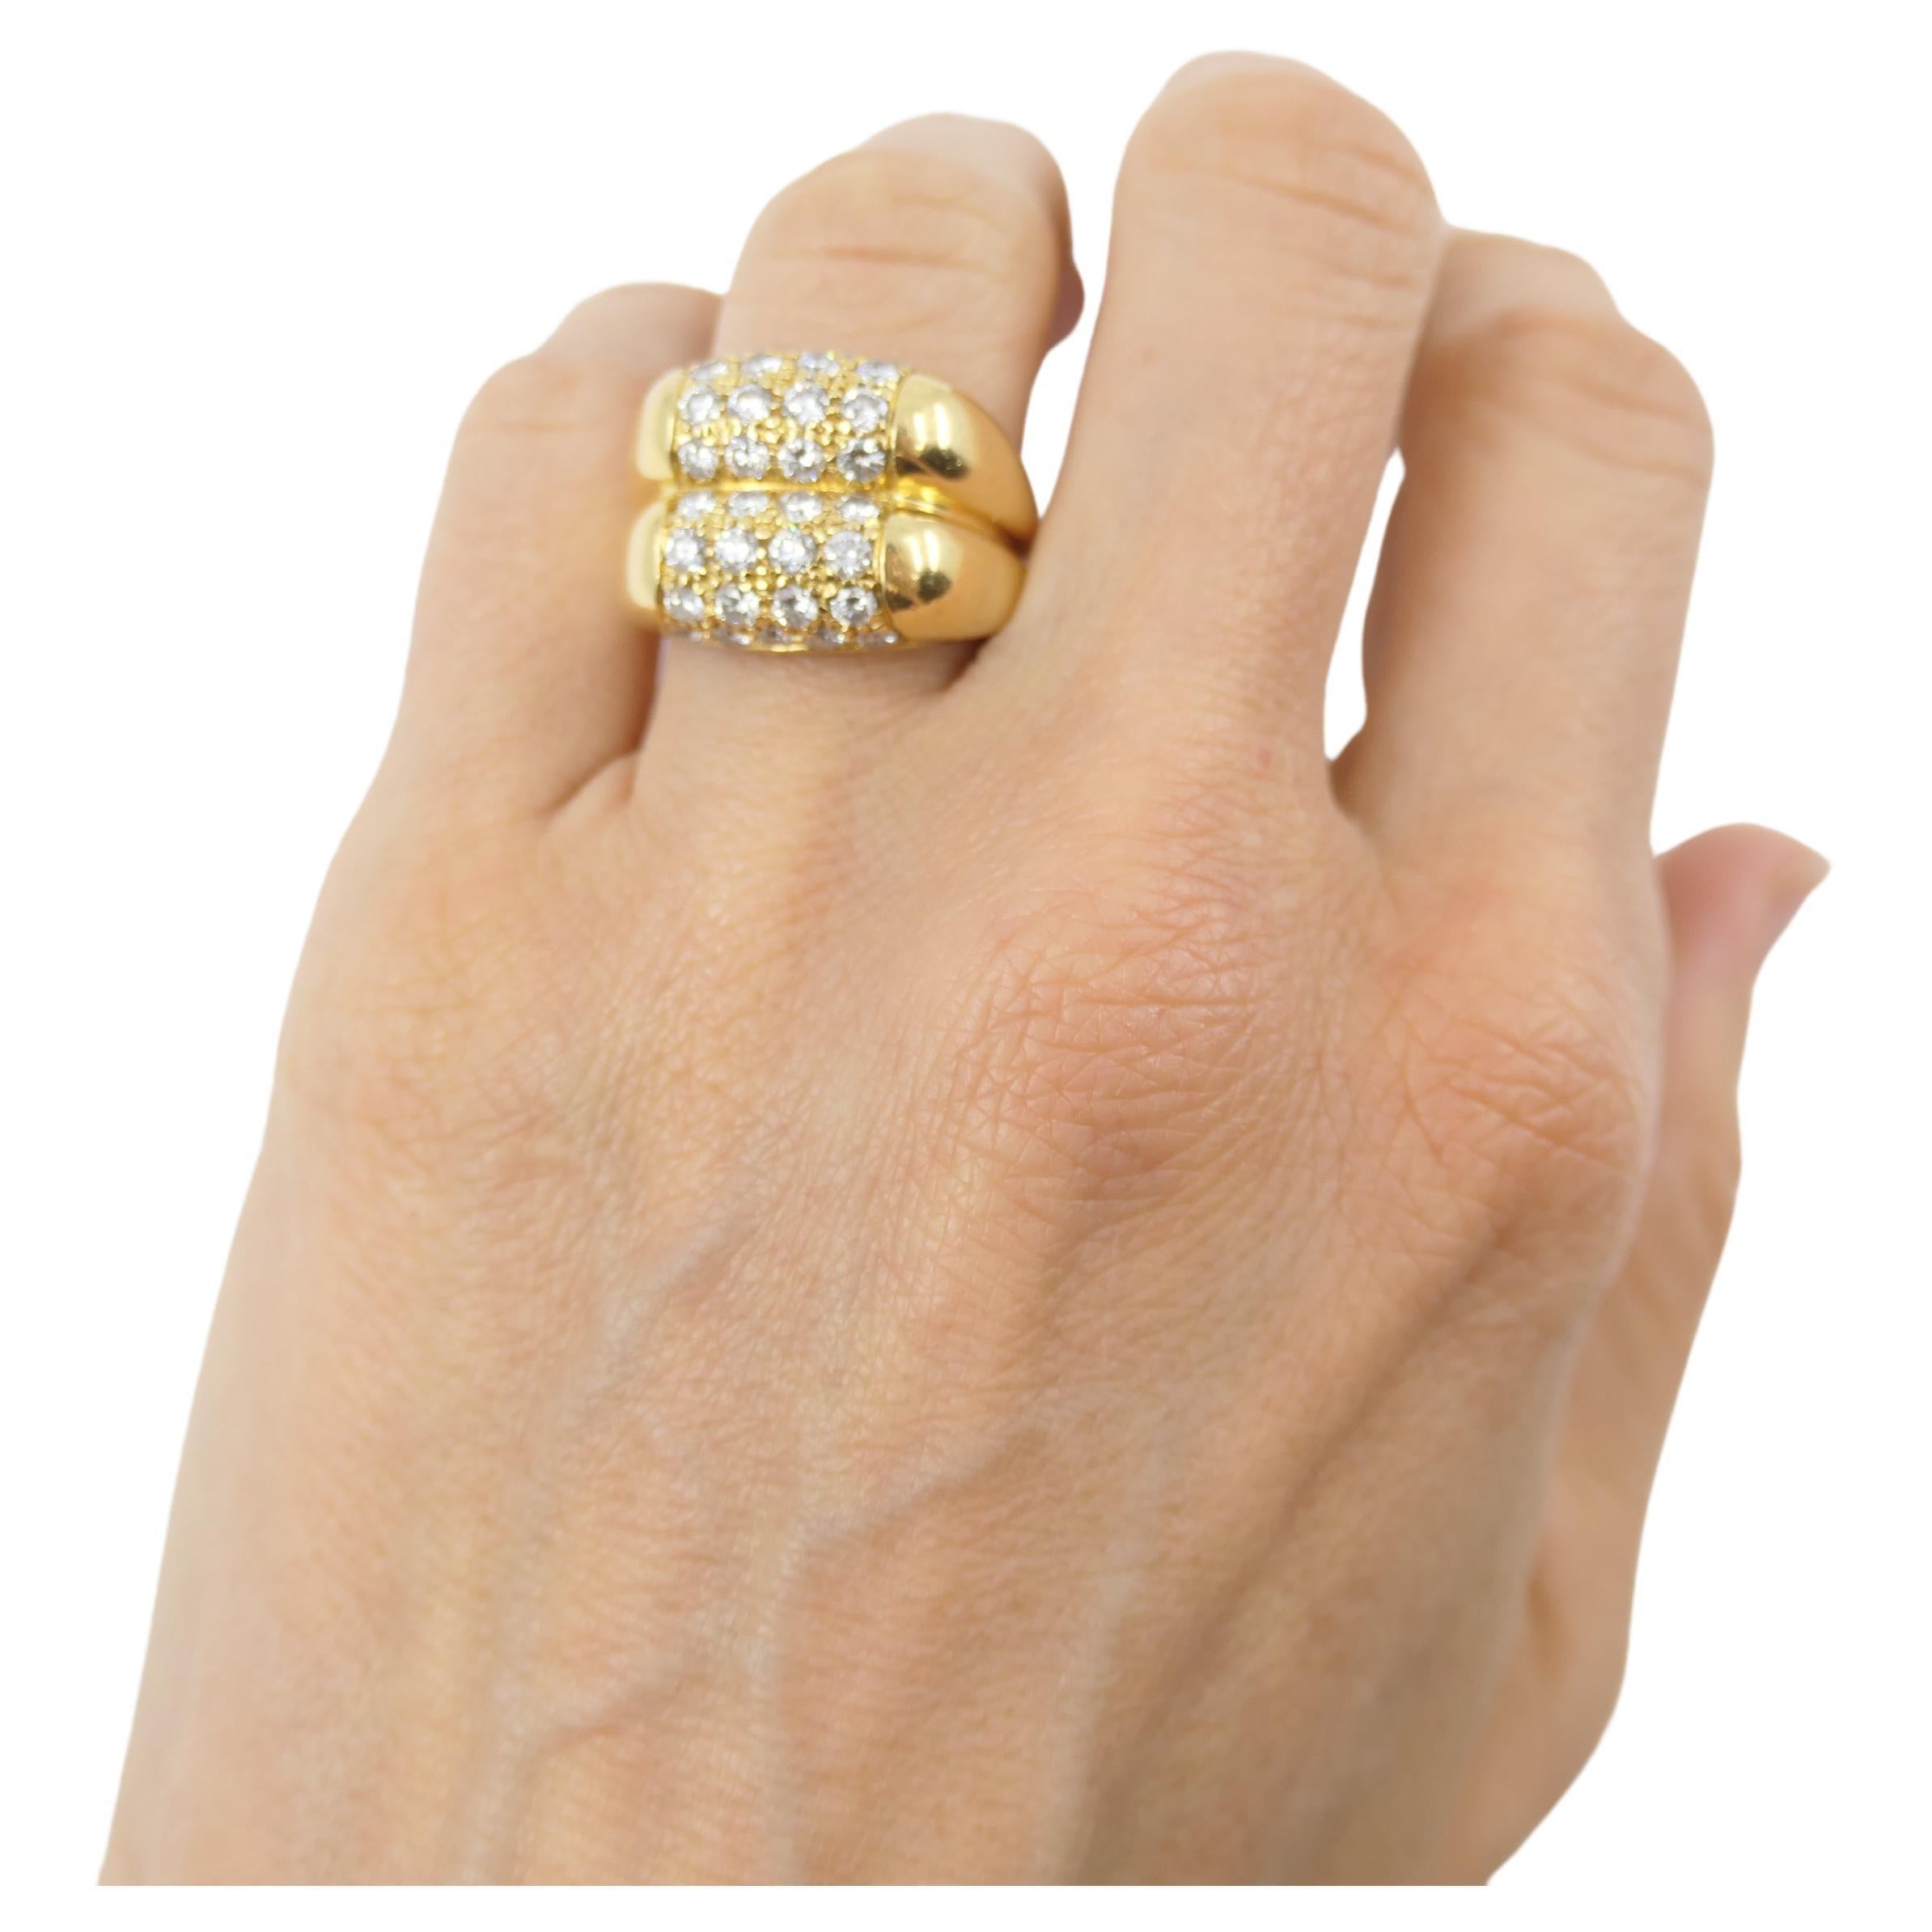 A double Tronchetto ring by Bulgari, made of 18k gold, features diamonds. It's designed as two Tronchettos being put on top of one another. The diamonds are pave, arranged in straight lines of four gems. The ring's design is minimal, yet it looks